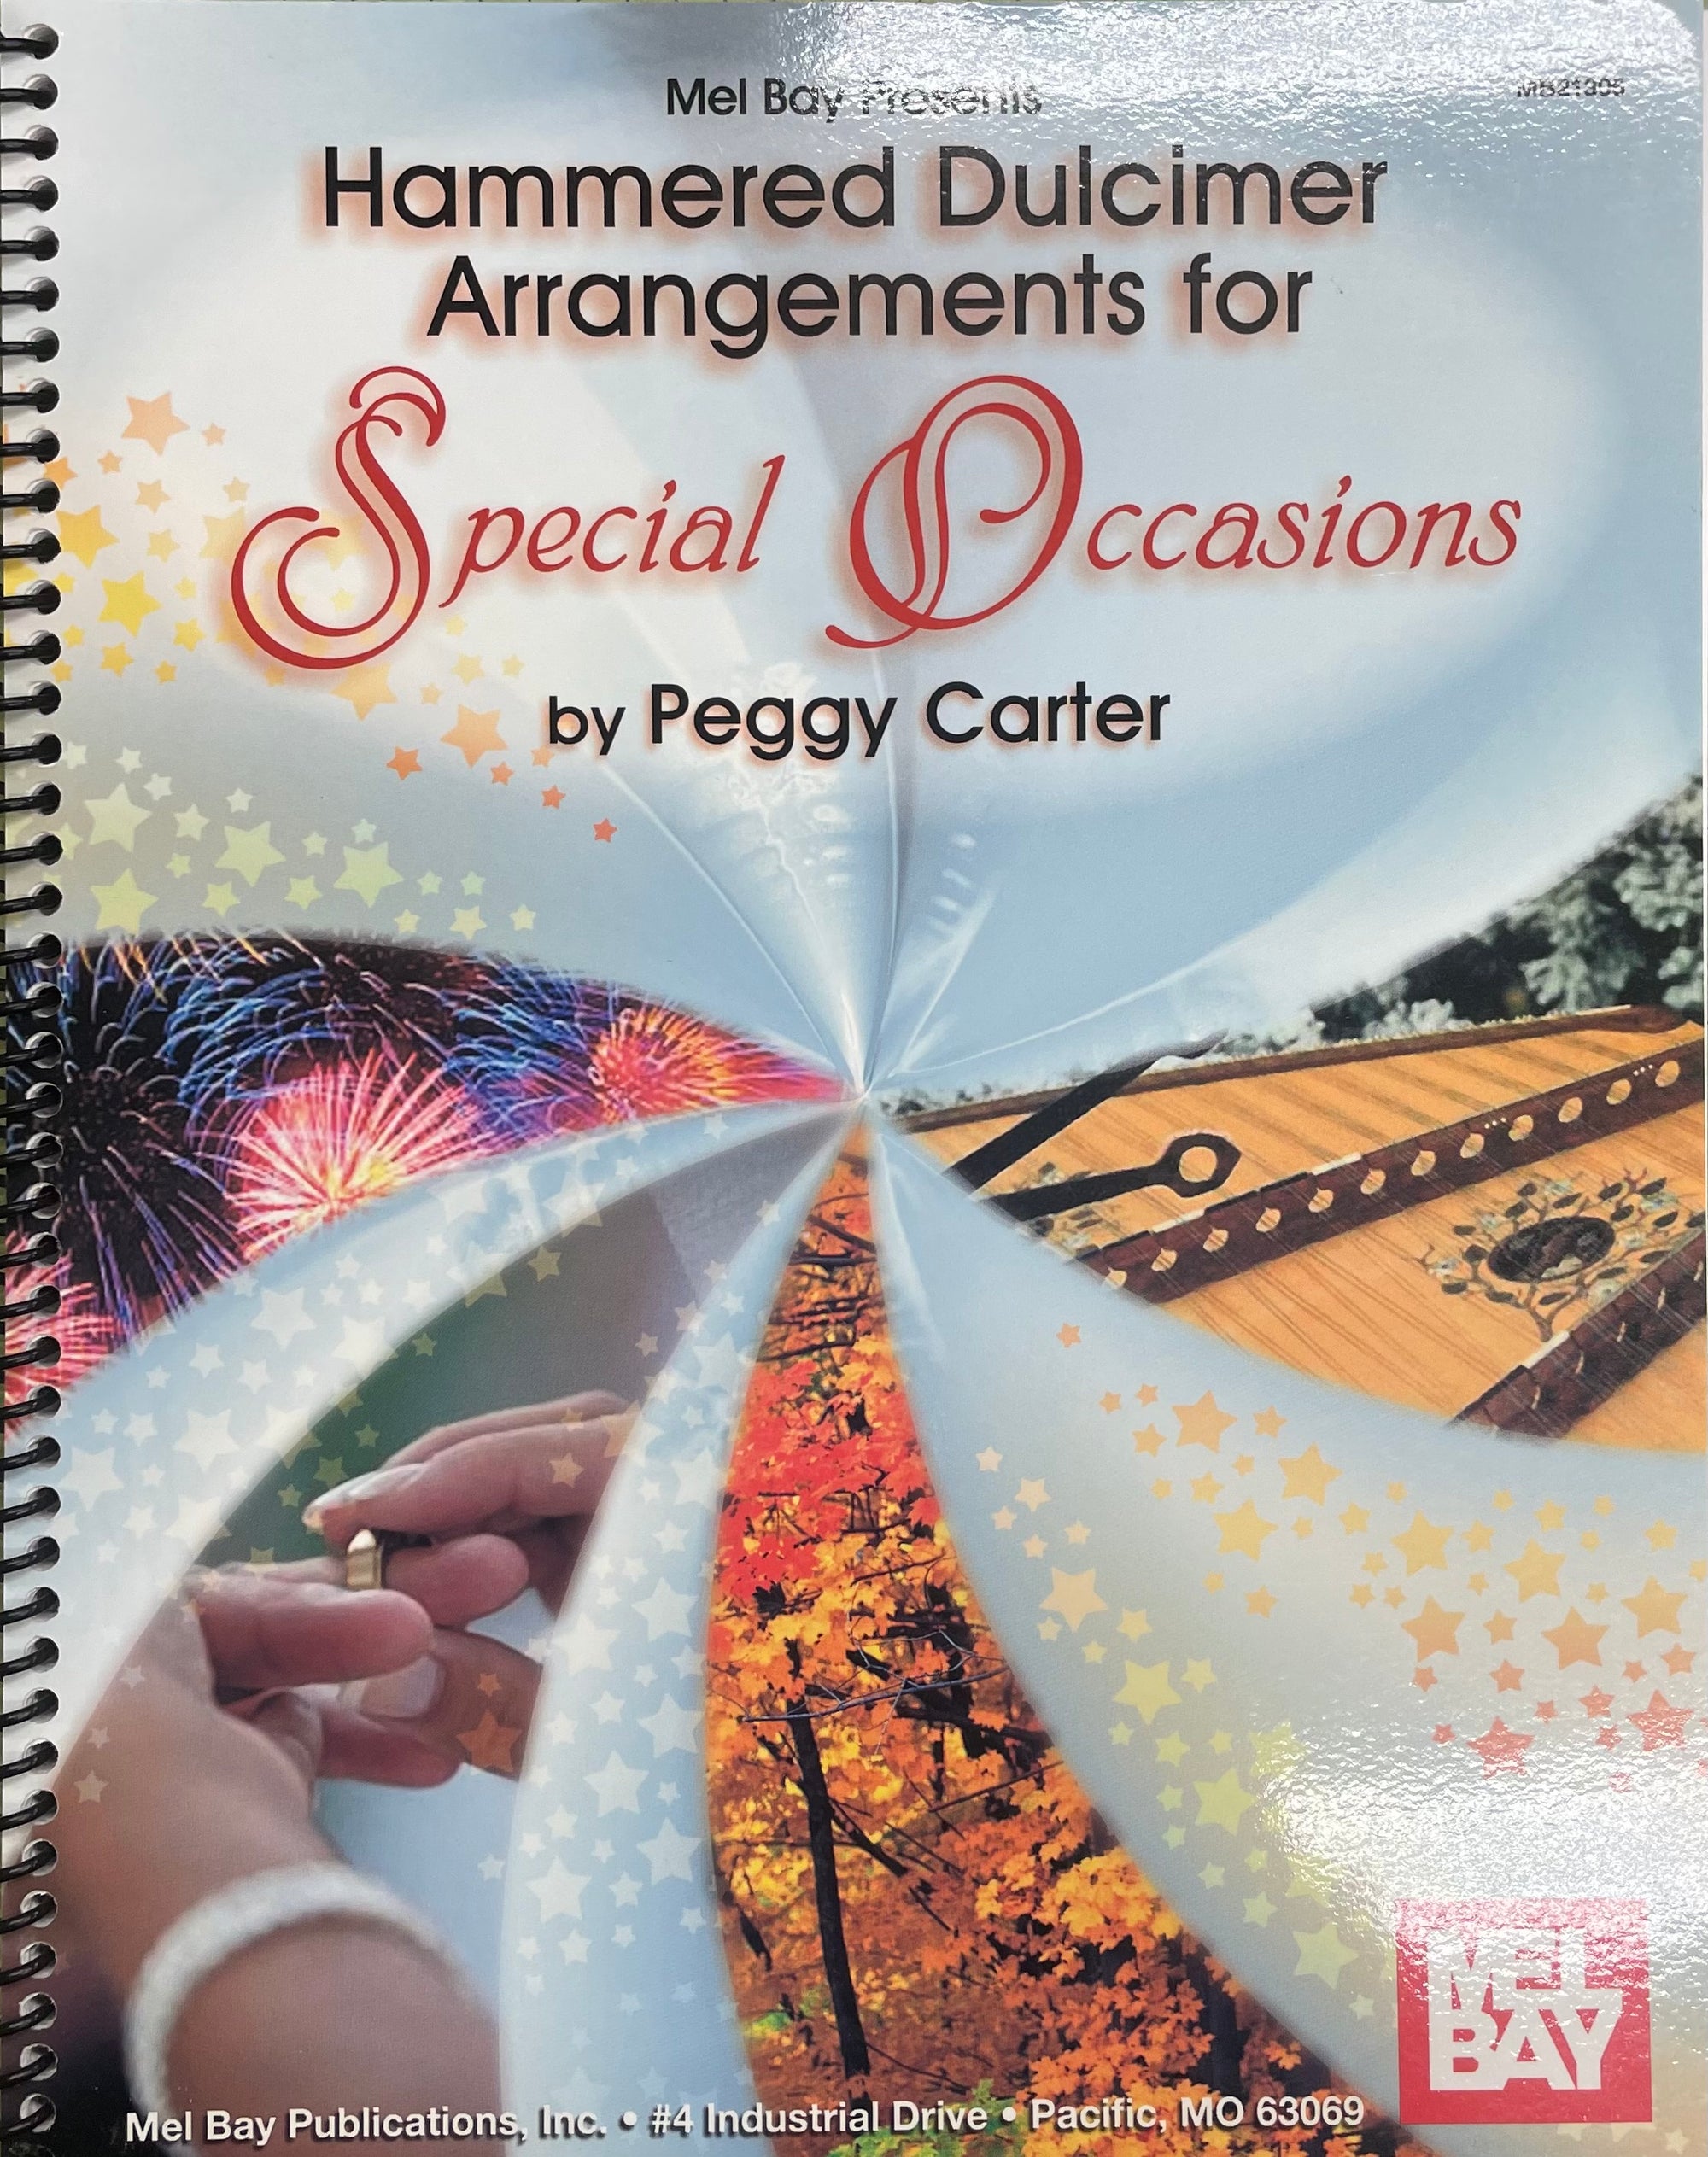 Cover of a book titled "Hammered Dulcimer for Special Occasions" by Peggy Carter. Features images of festive lights, a dulcimer, and a hand playing the instrument with a background of stars, perfect for weddings and dances.